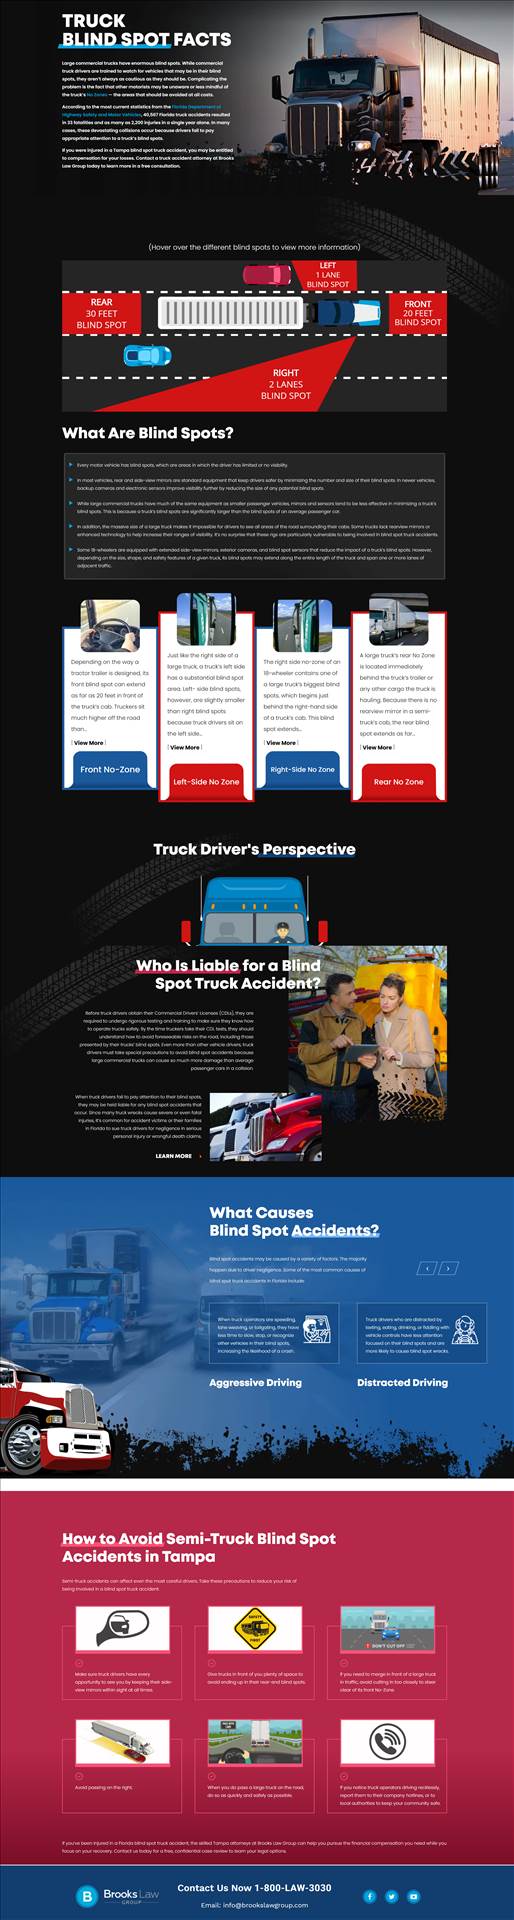 Brooks-Law-Group-Semi-trailer-truck-blind-spots-infographic.jpg  by brookslawgroup